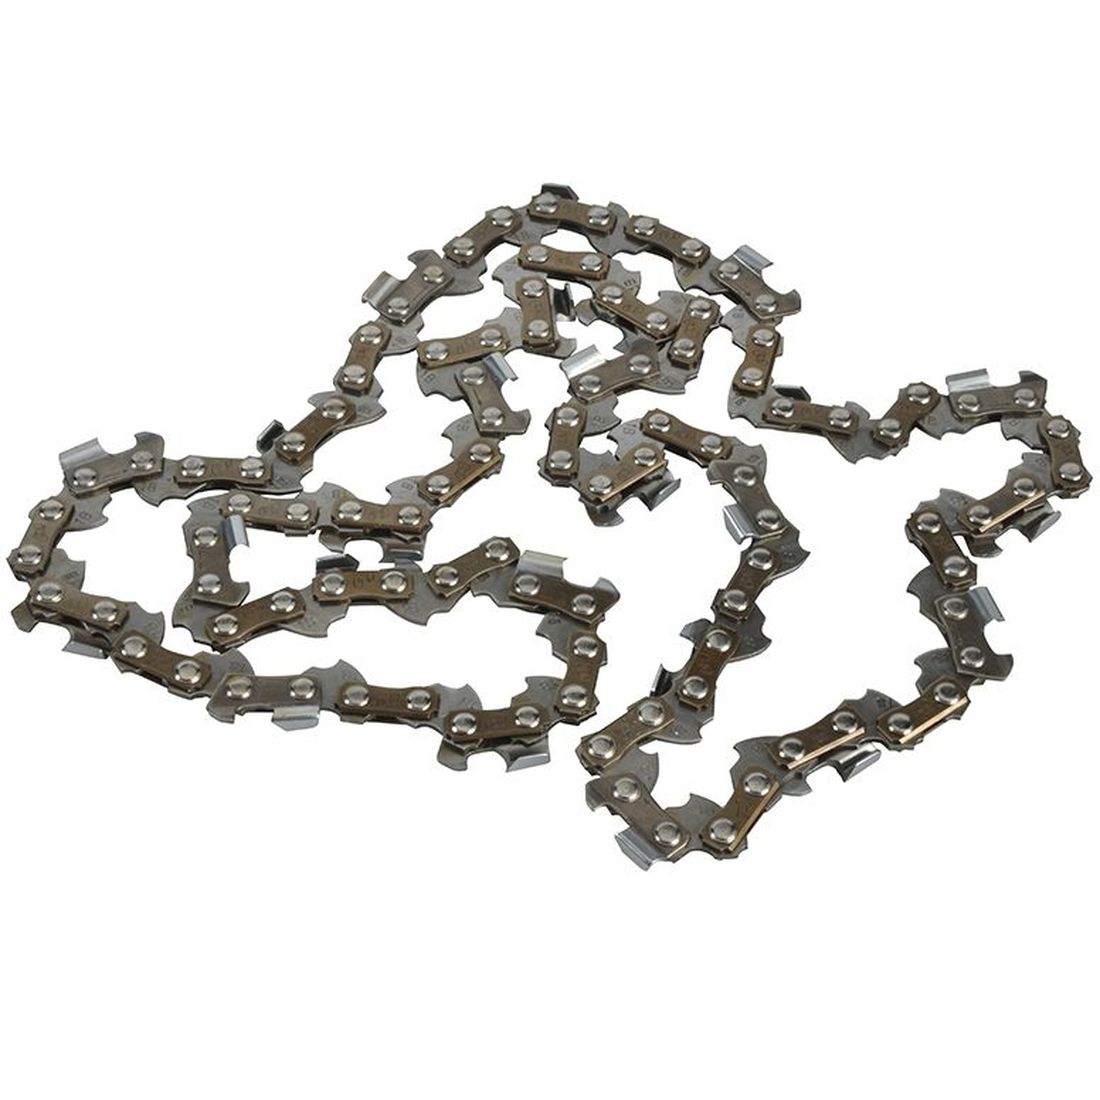 ALM CH050 Chainsaw Chain 3/8in x 50 links 1.3mm - Fits 35cm Bars                    